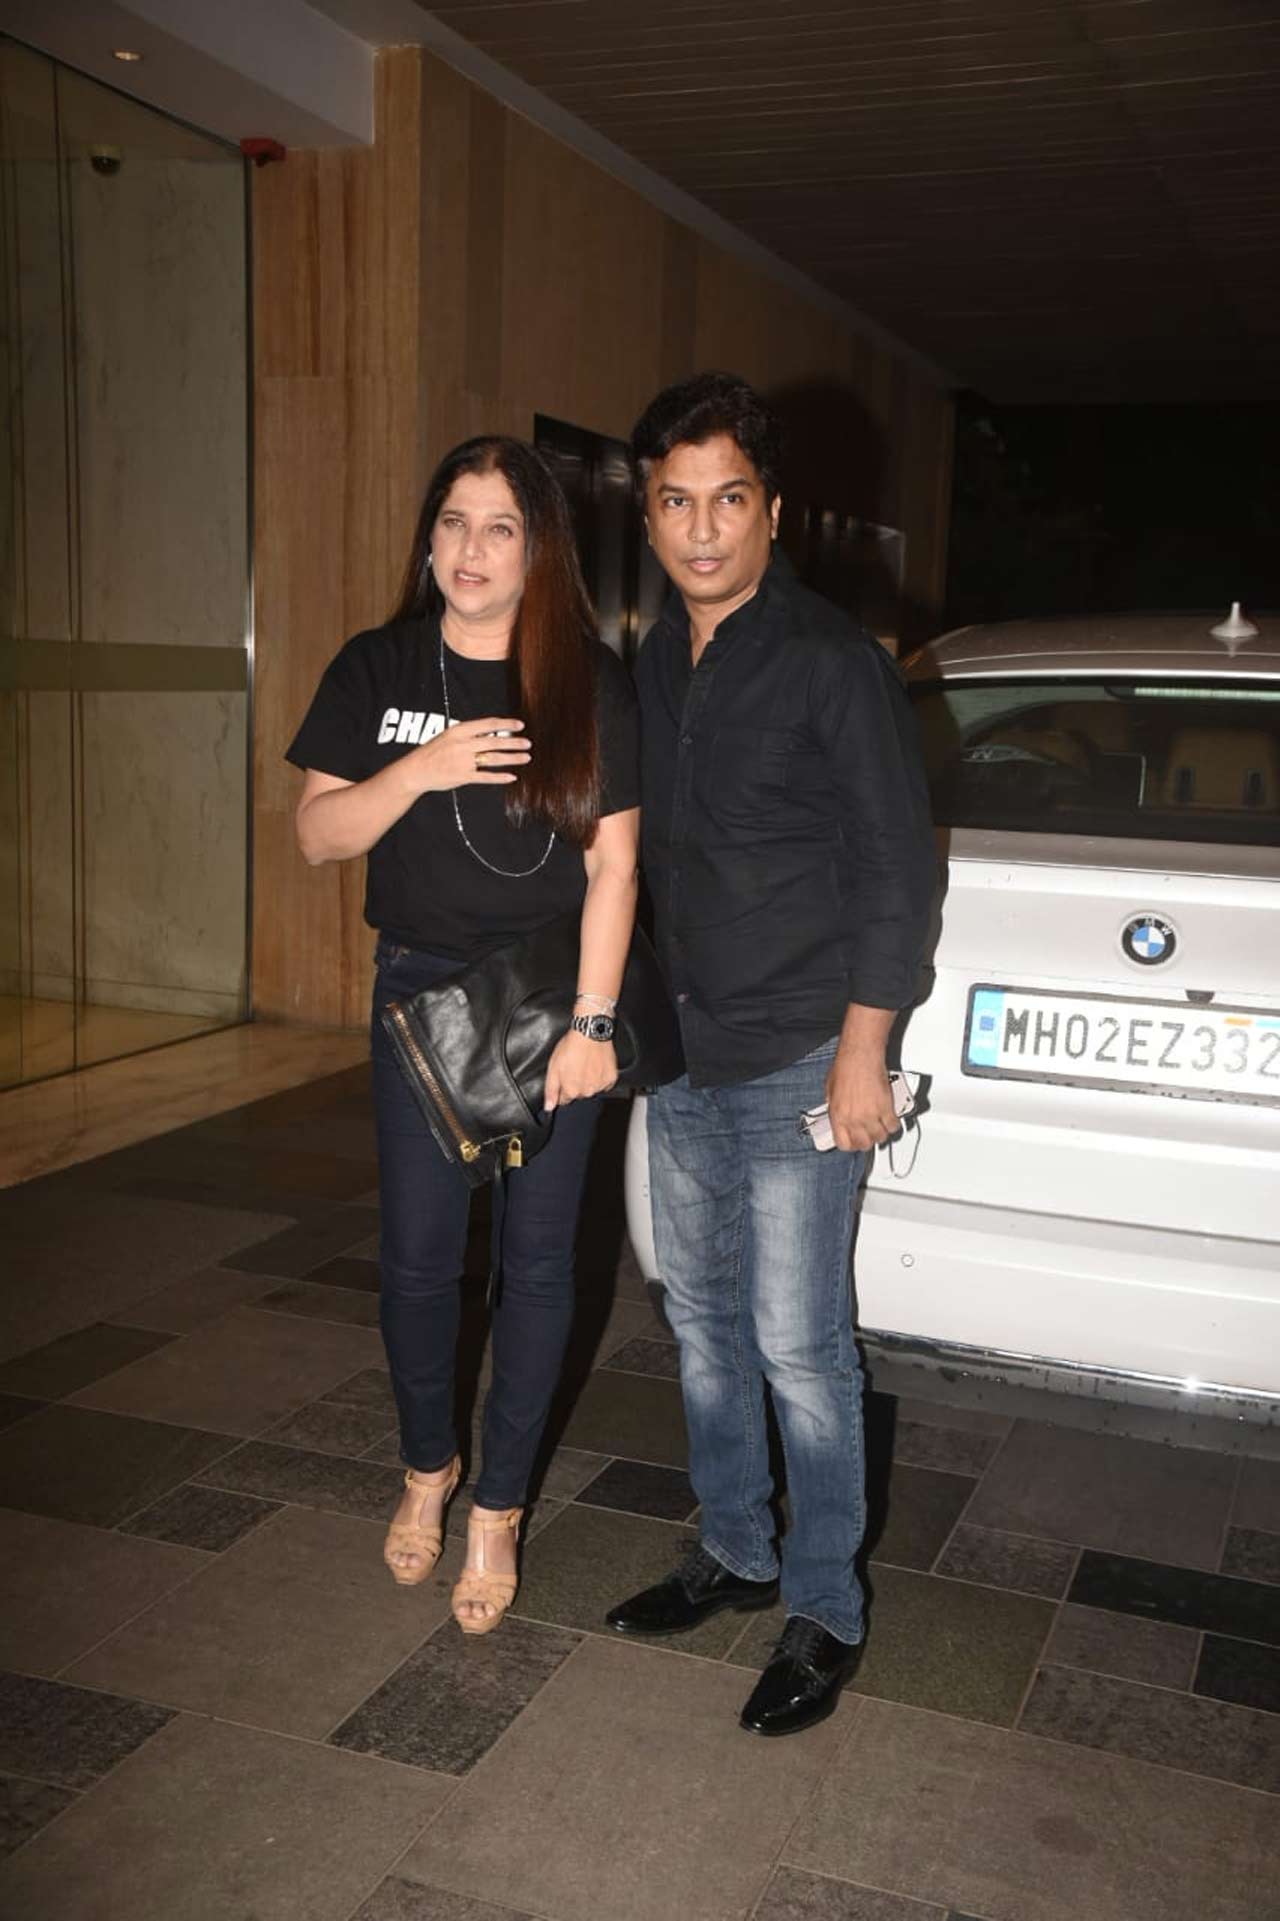 Vikram Phadnis, a popular fashion designer, attended the bash with one of his friends. Phadnis surprised everyone when he announced his decision to enter showbiz as a director and a producer. But he says he will never ditch the fashion world for the film industry. Phadnis entered the film business with Marathi project 'Hrudayantar'. 